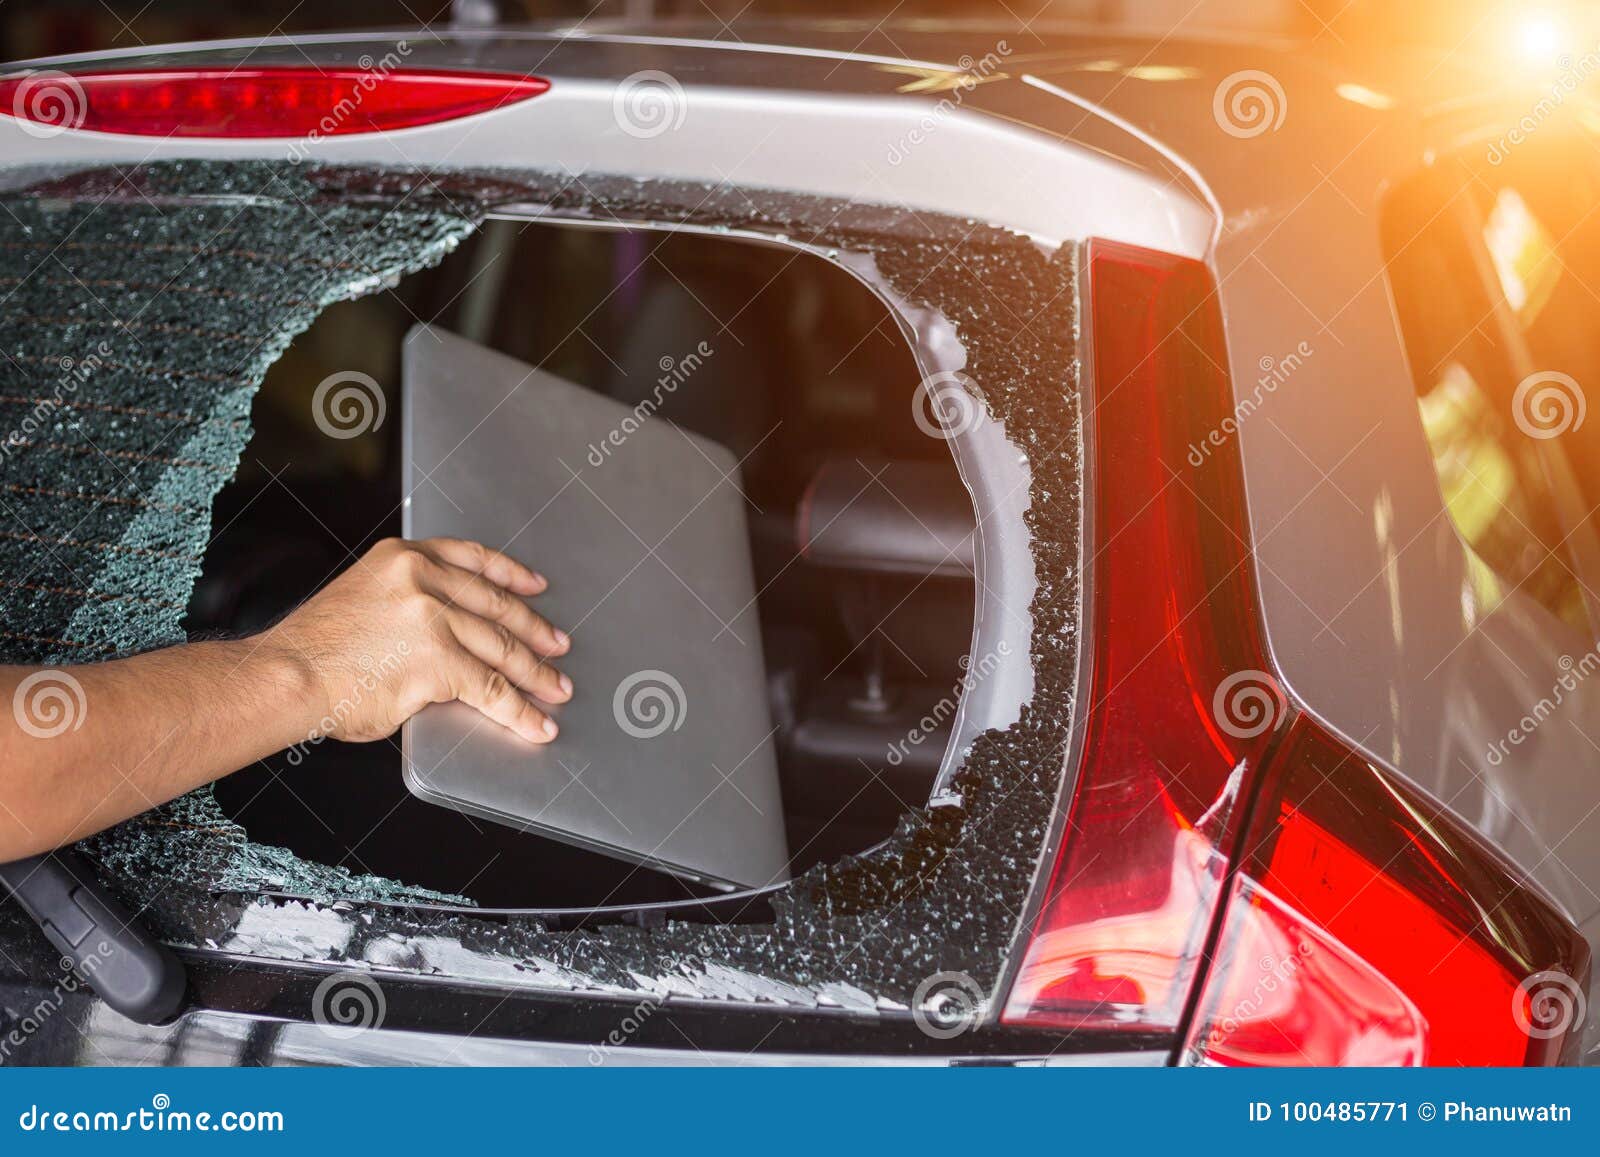 hand stealing laptop from back side of car which rear glass broken